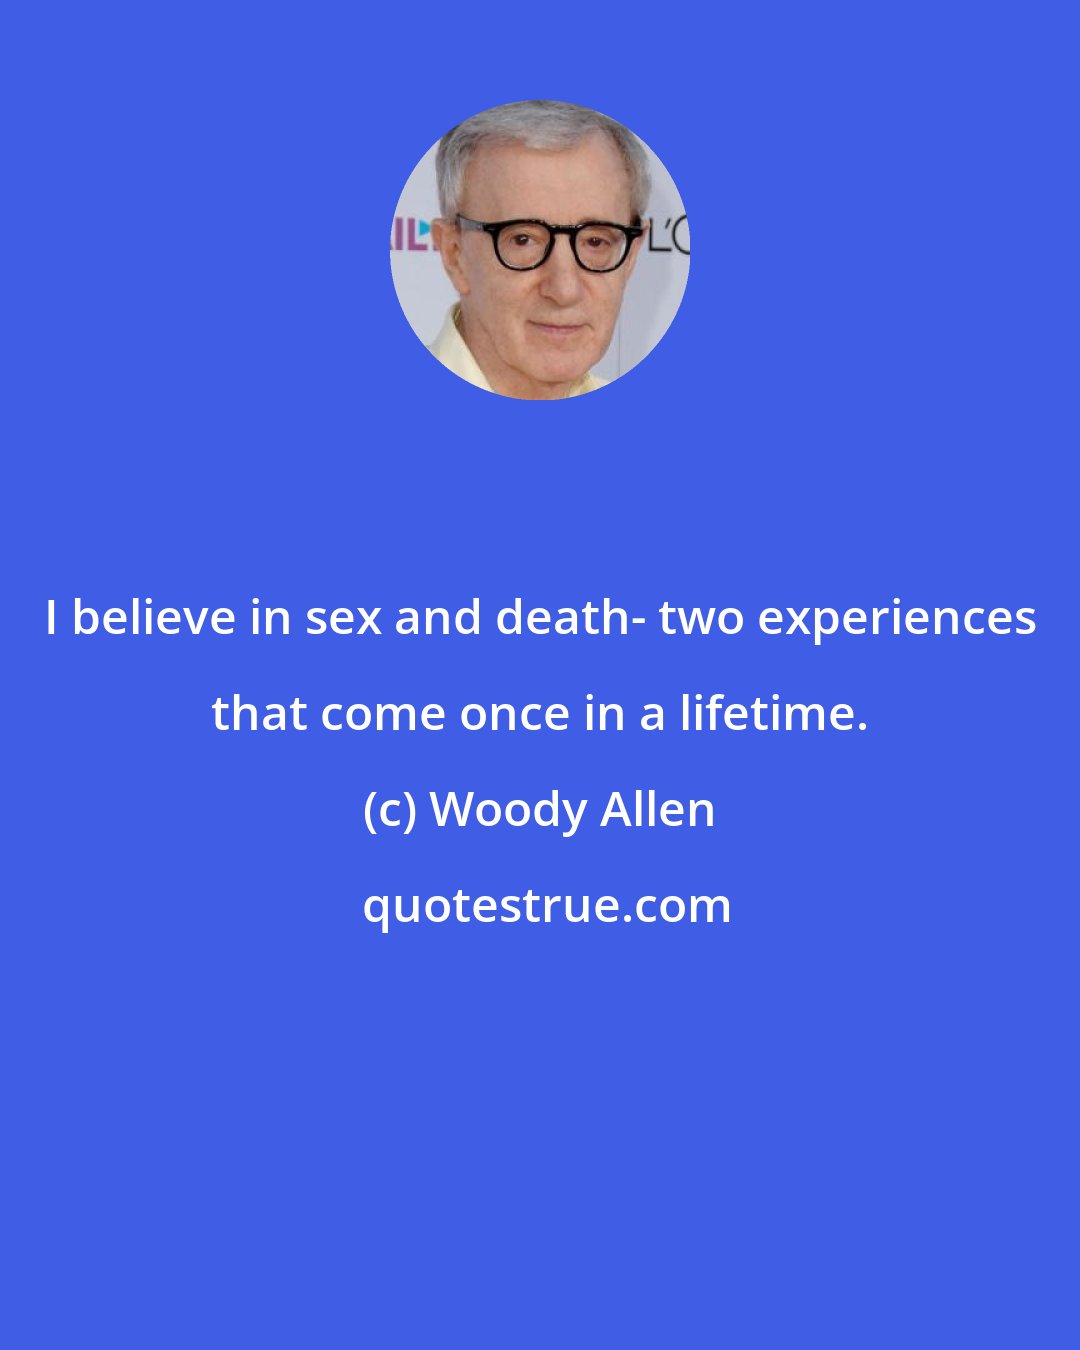 Woody Allen: I believe in sex and death- two experiences that come once in a lifetime.